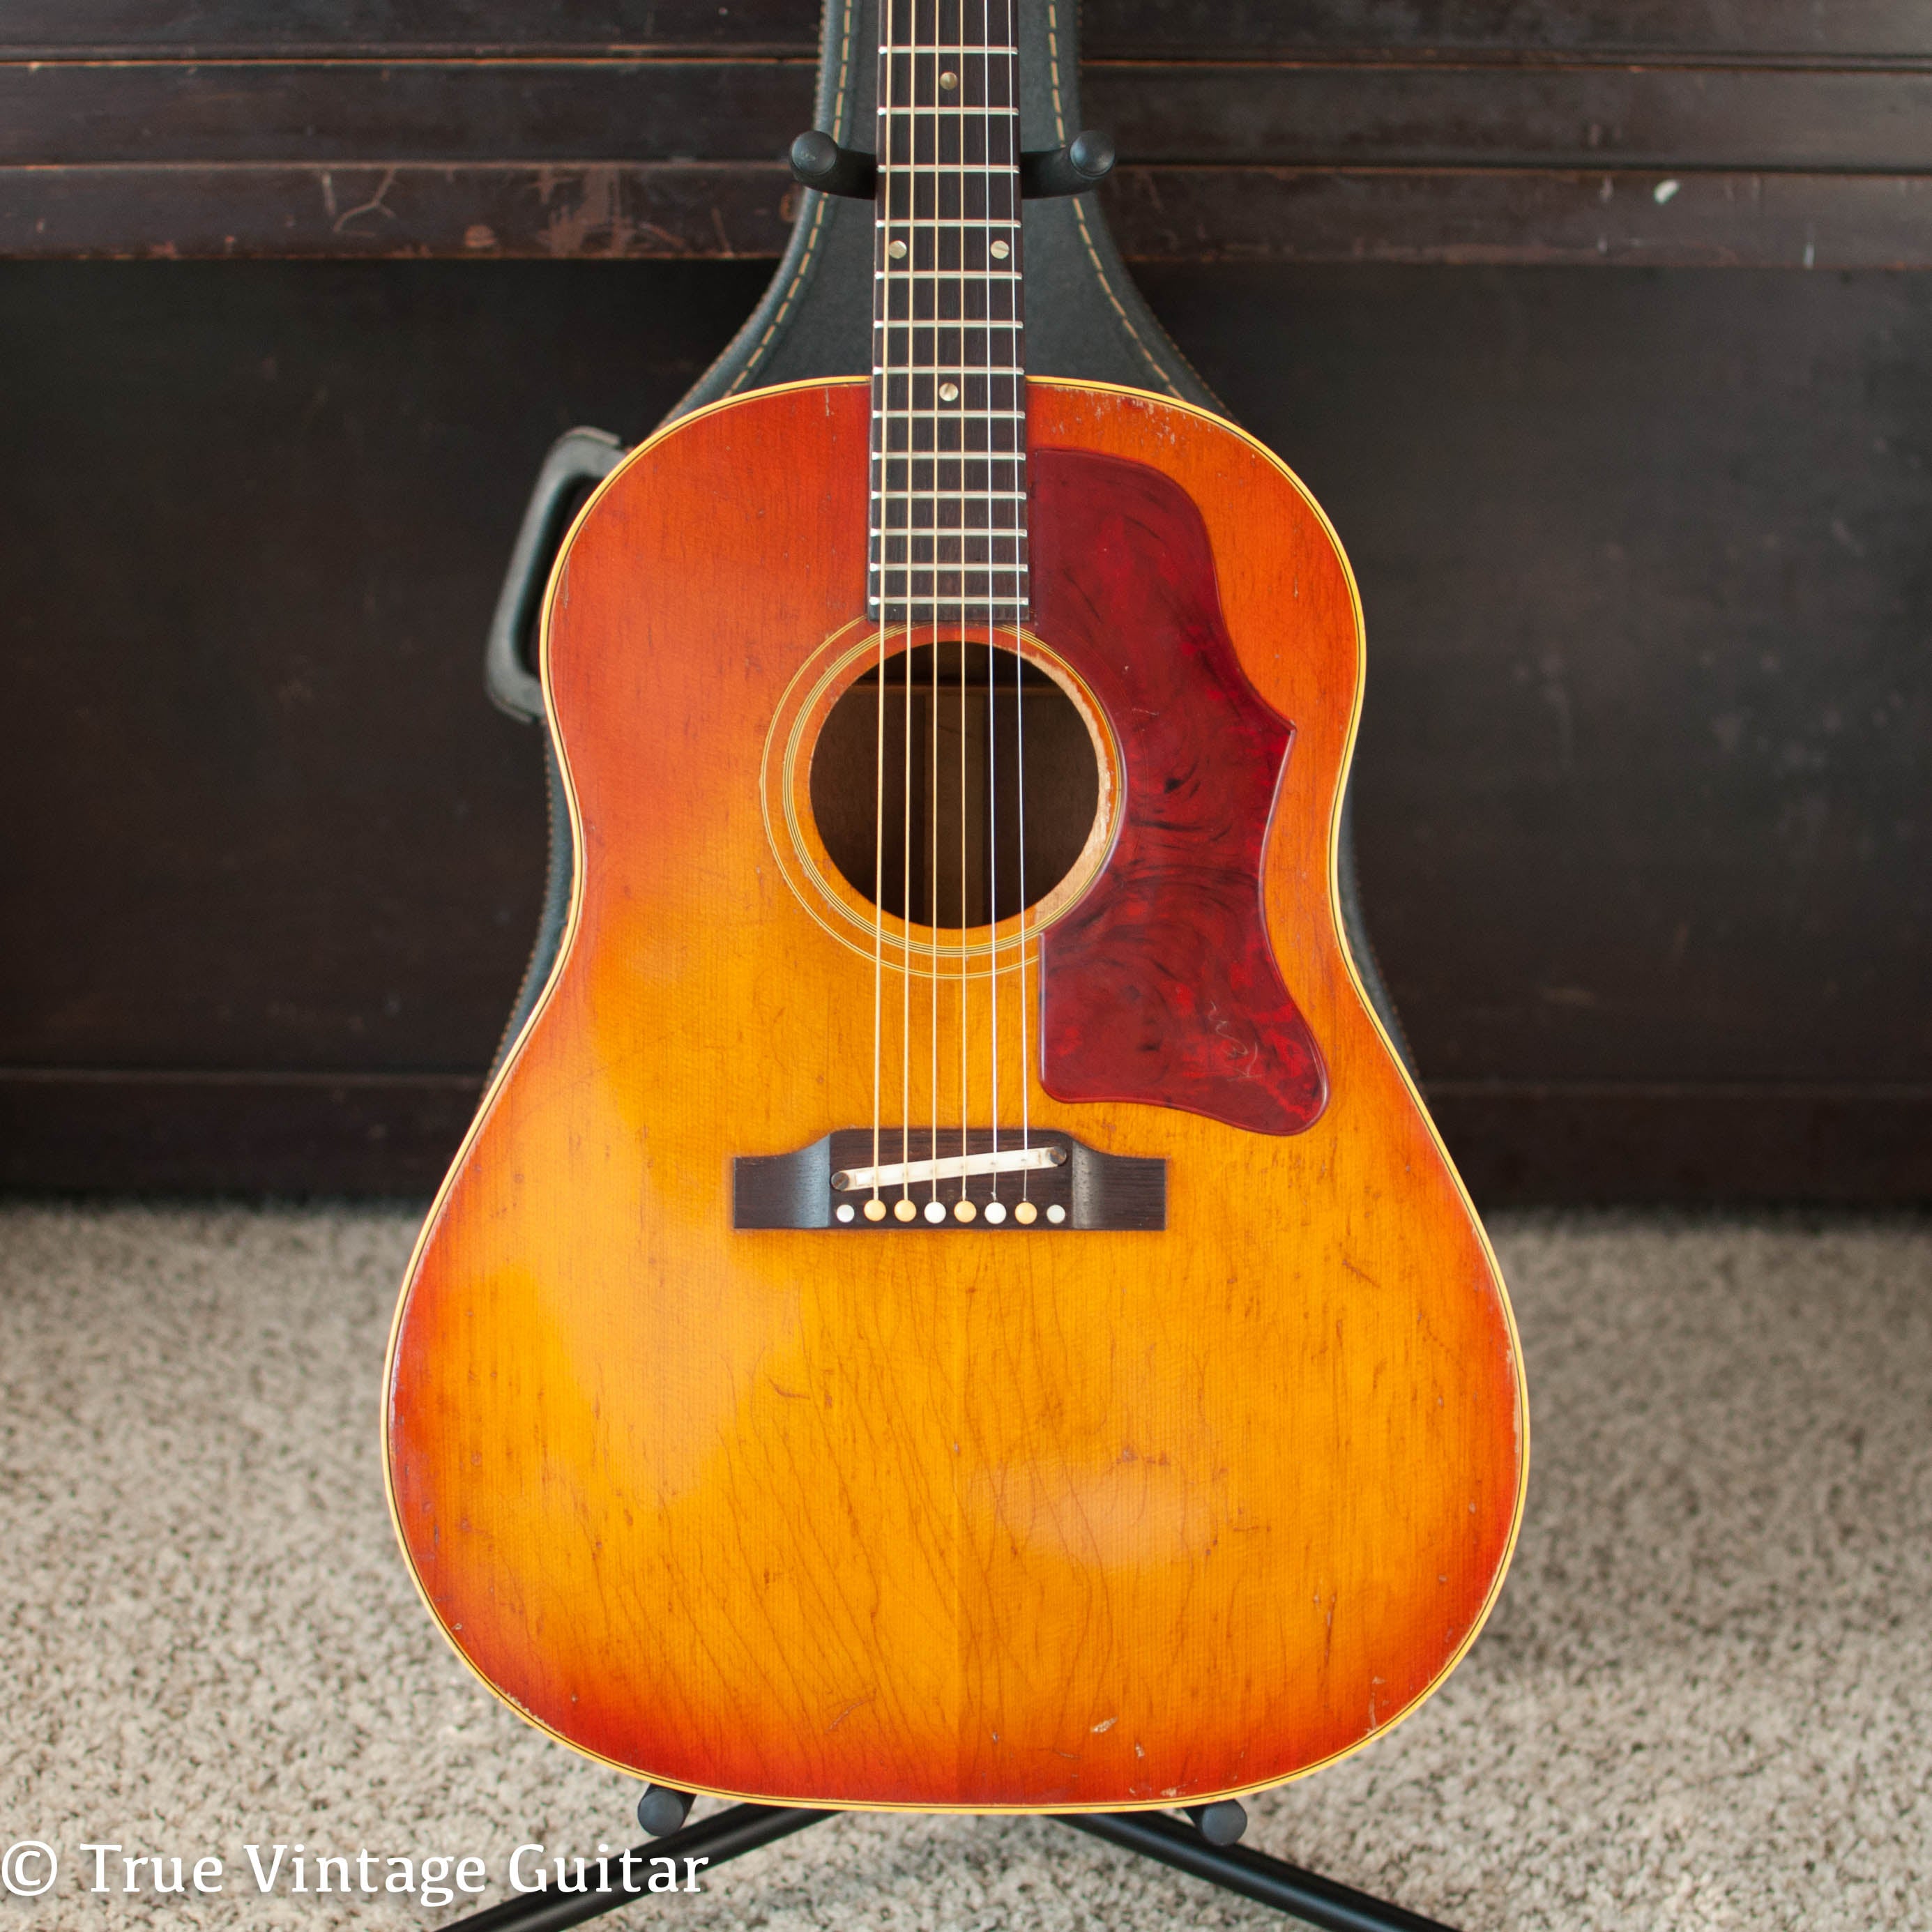 1960s Gibson acoustic guitar